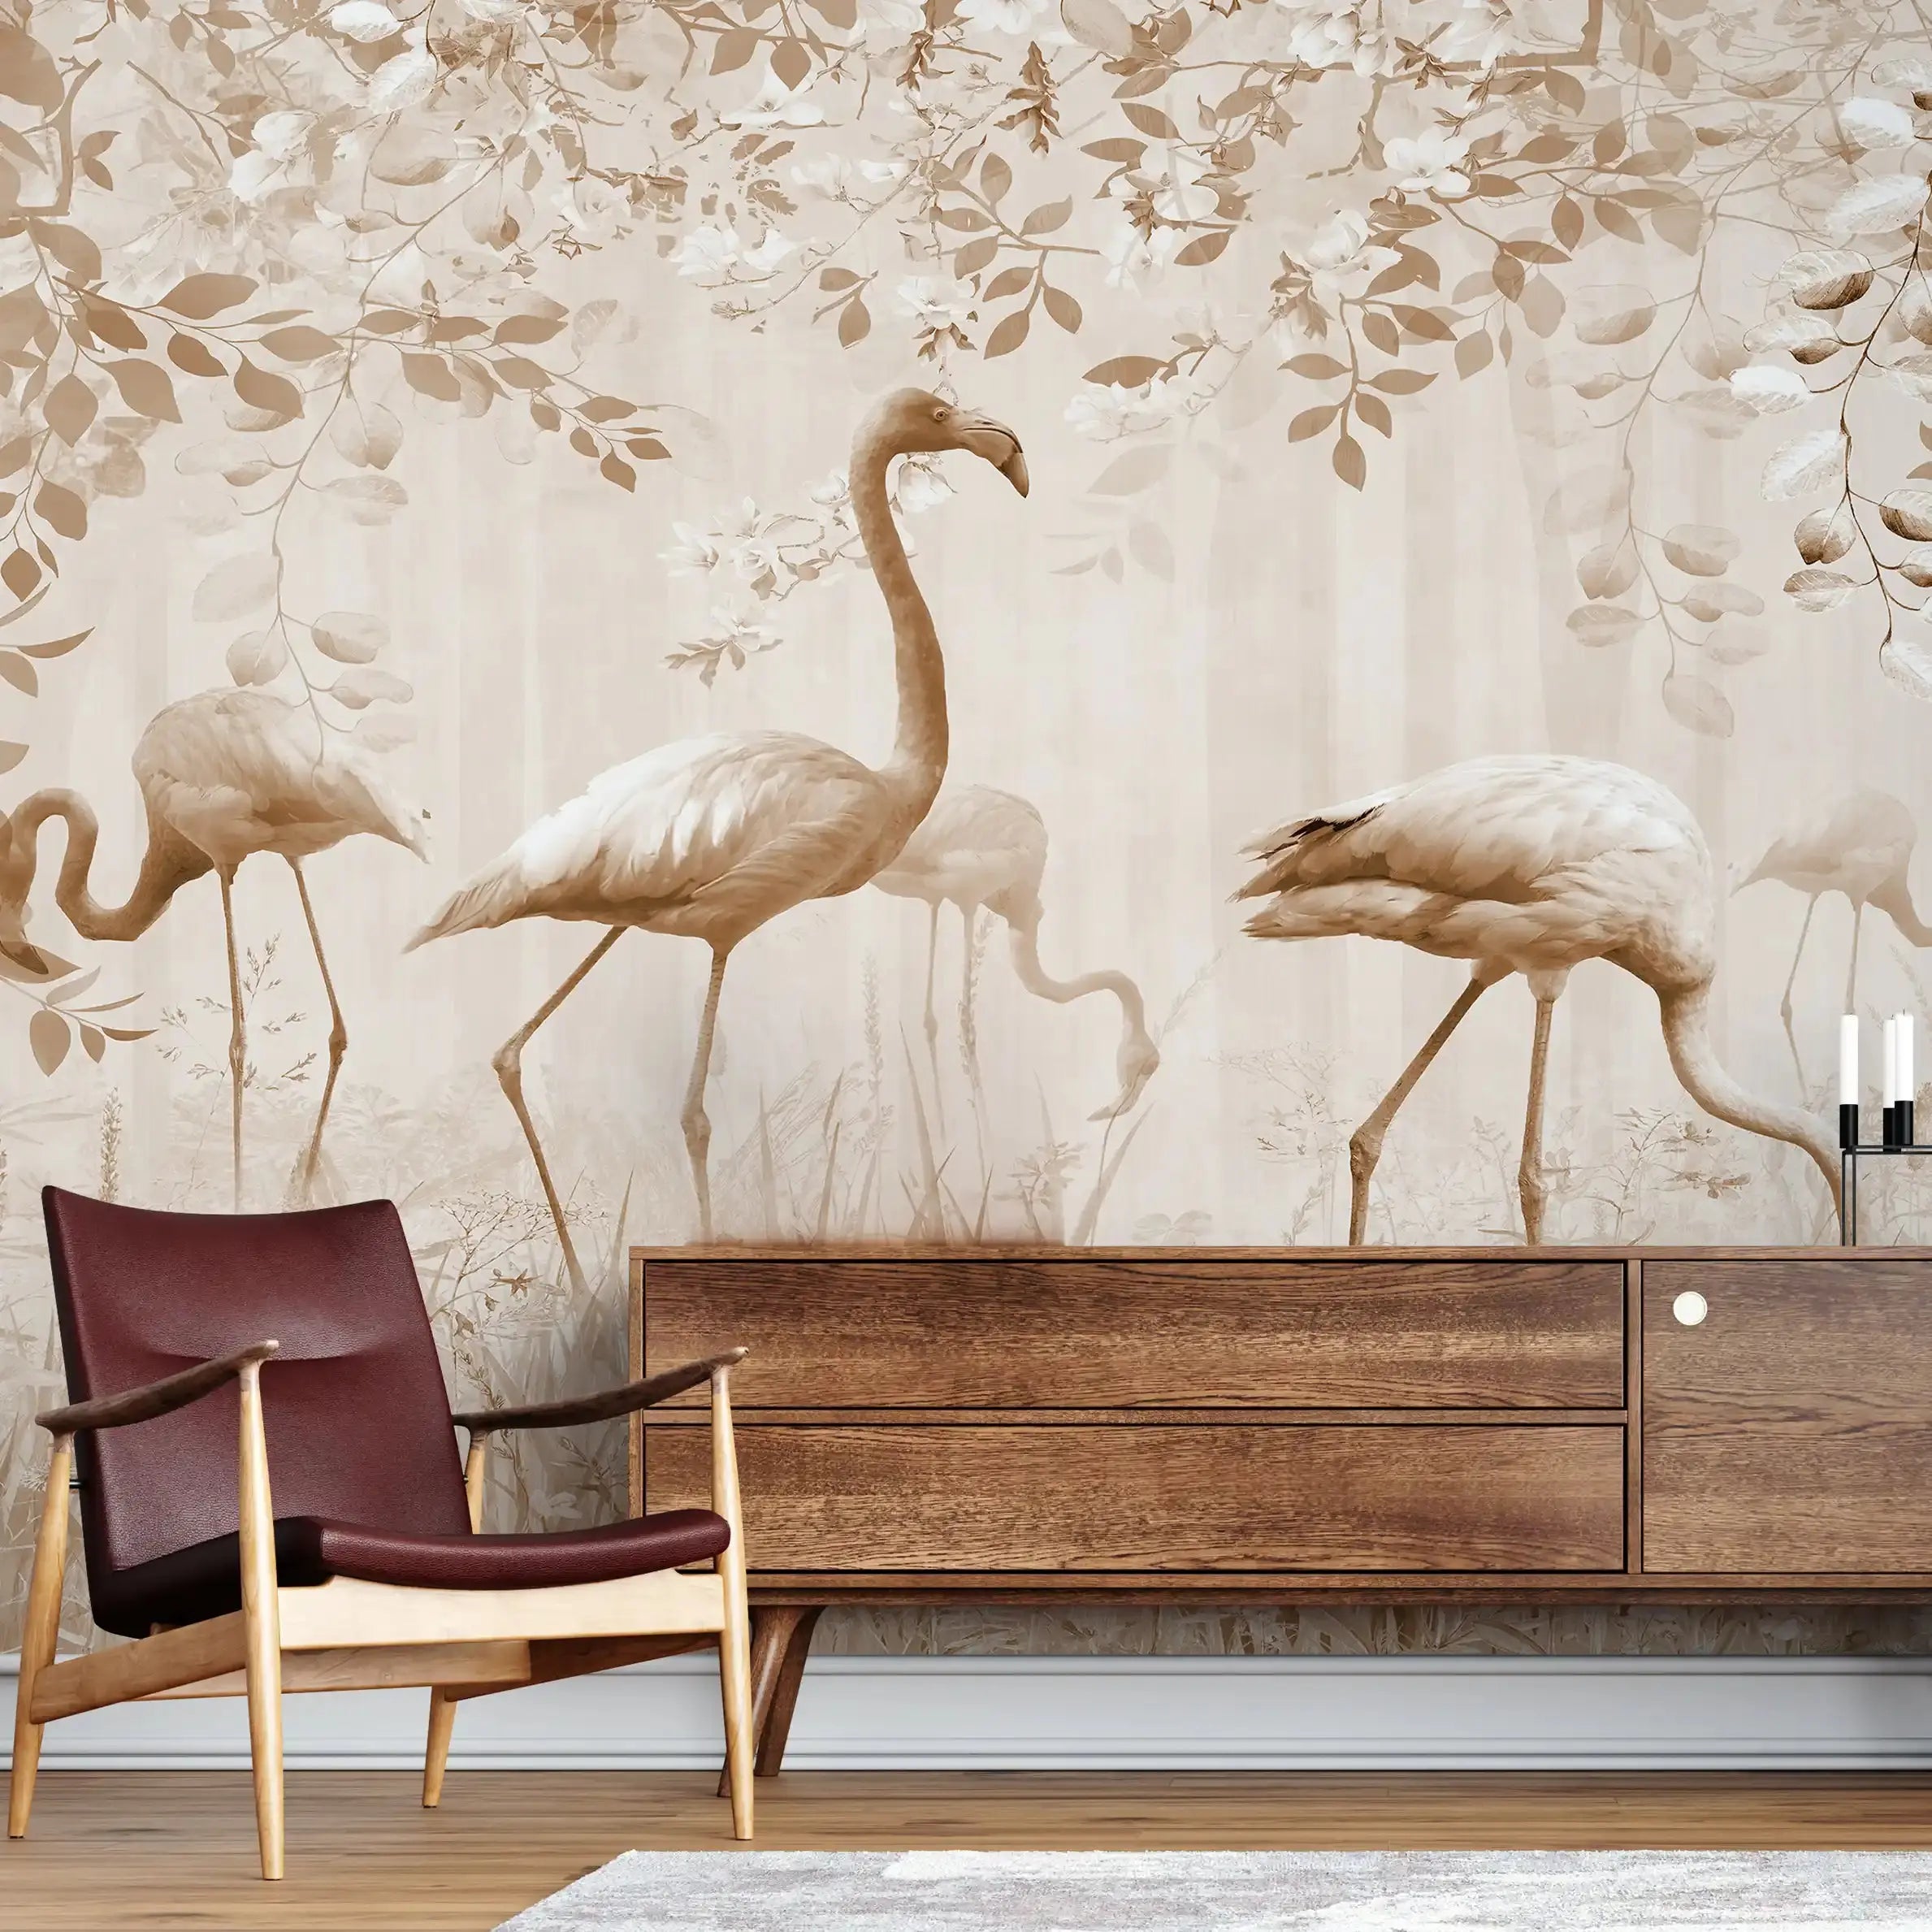 3054-D / Peel and Stick Wallpaper with Brown FlamingoBoho WallPaper for Wall Decor, Easy Install, Removable for Nursery, Bathroom, Bedroom - Artevella